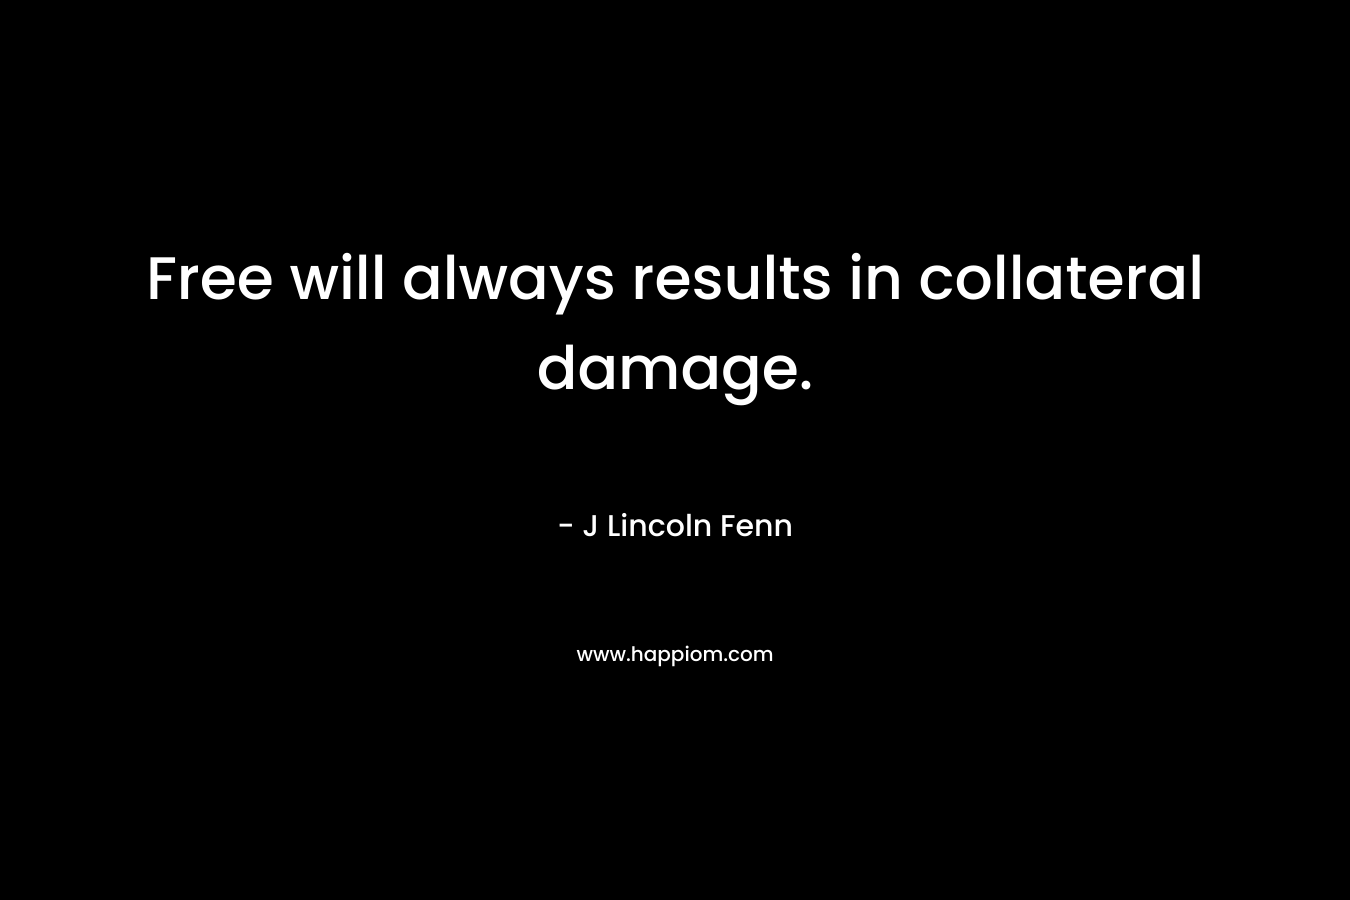 Free will always results in collateral damage.